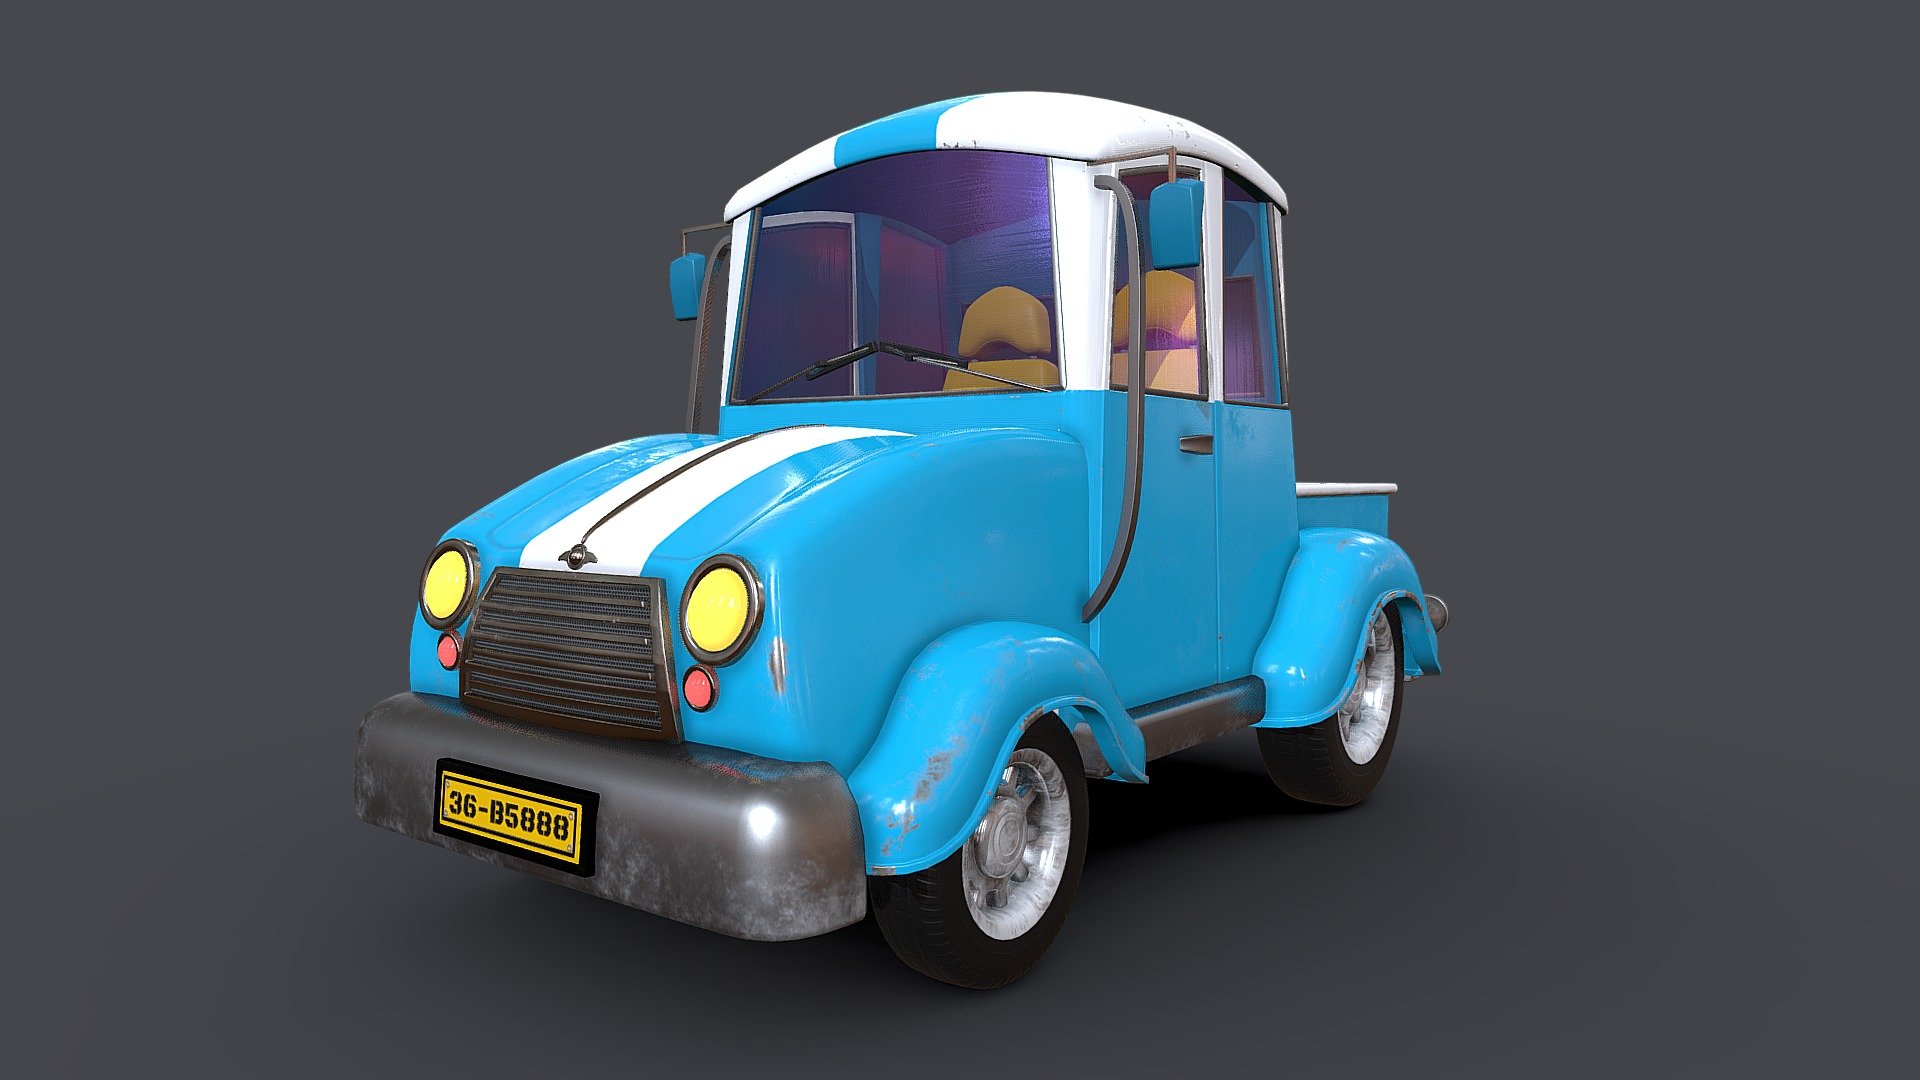 3D Models Truck

Polys : 44841 Verts: 46598

Textures: 02 textures 2048 x 2048 ( diff, normal, metallic, emissive, roughness )

Model we designed to be suitable for cartoons.

Hope you like this

Thanks for watching - Asset - Cartoons - Car - Truck VR / AR - Buy Royalty Free 3D model by InCom Studio (@incomstudio) 3d model